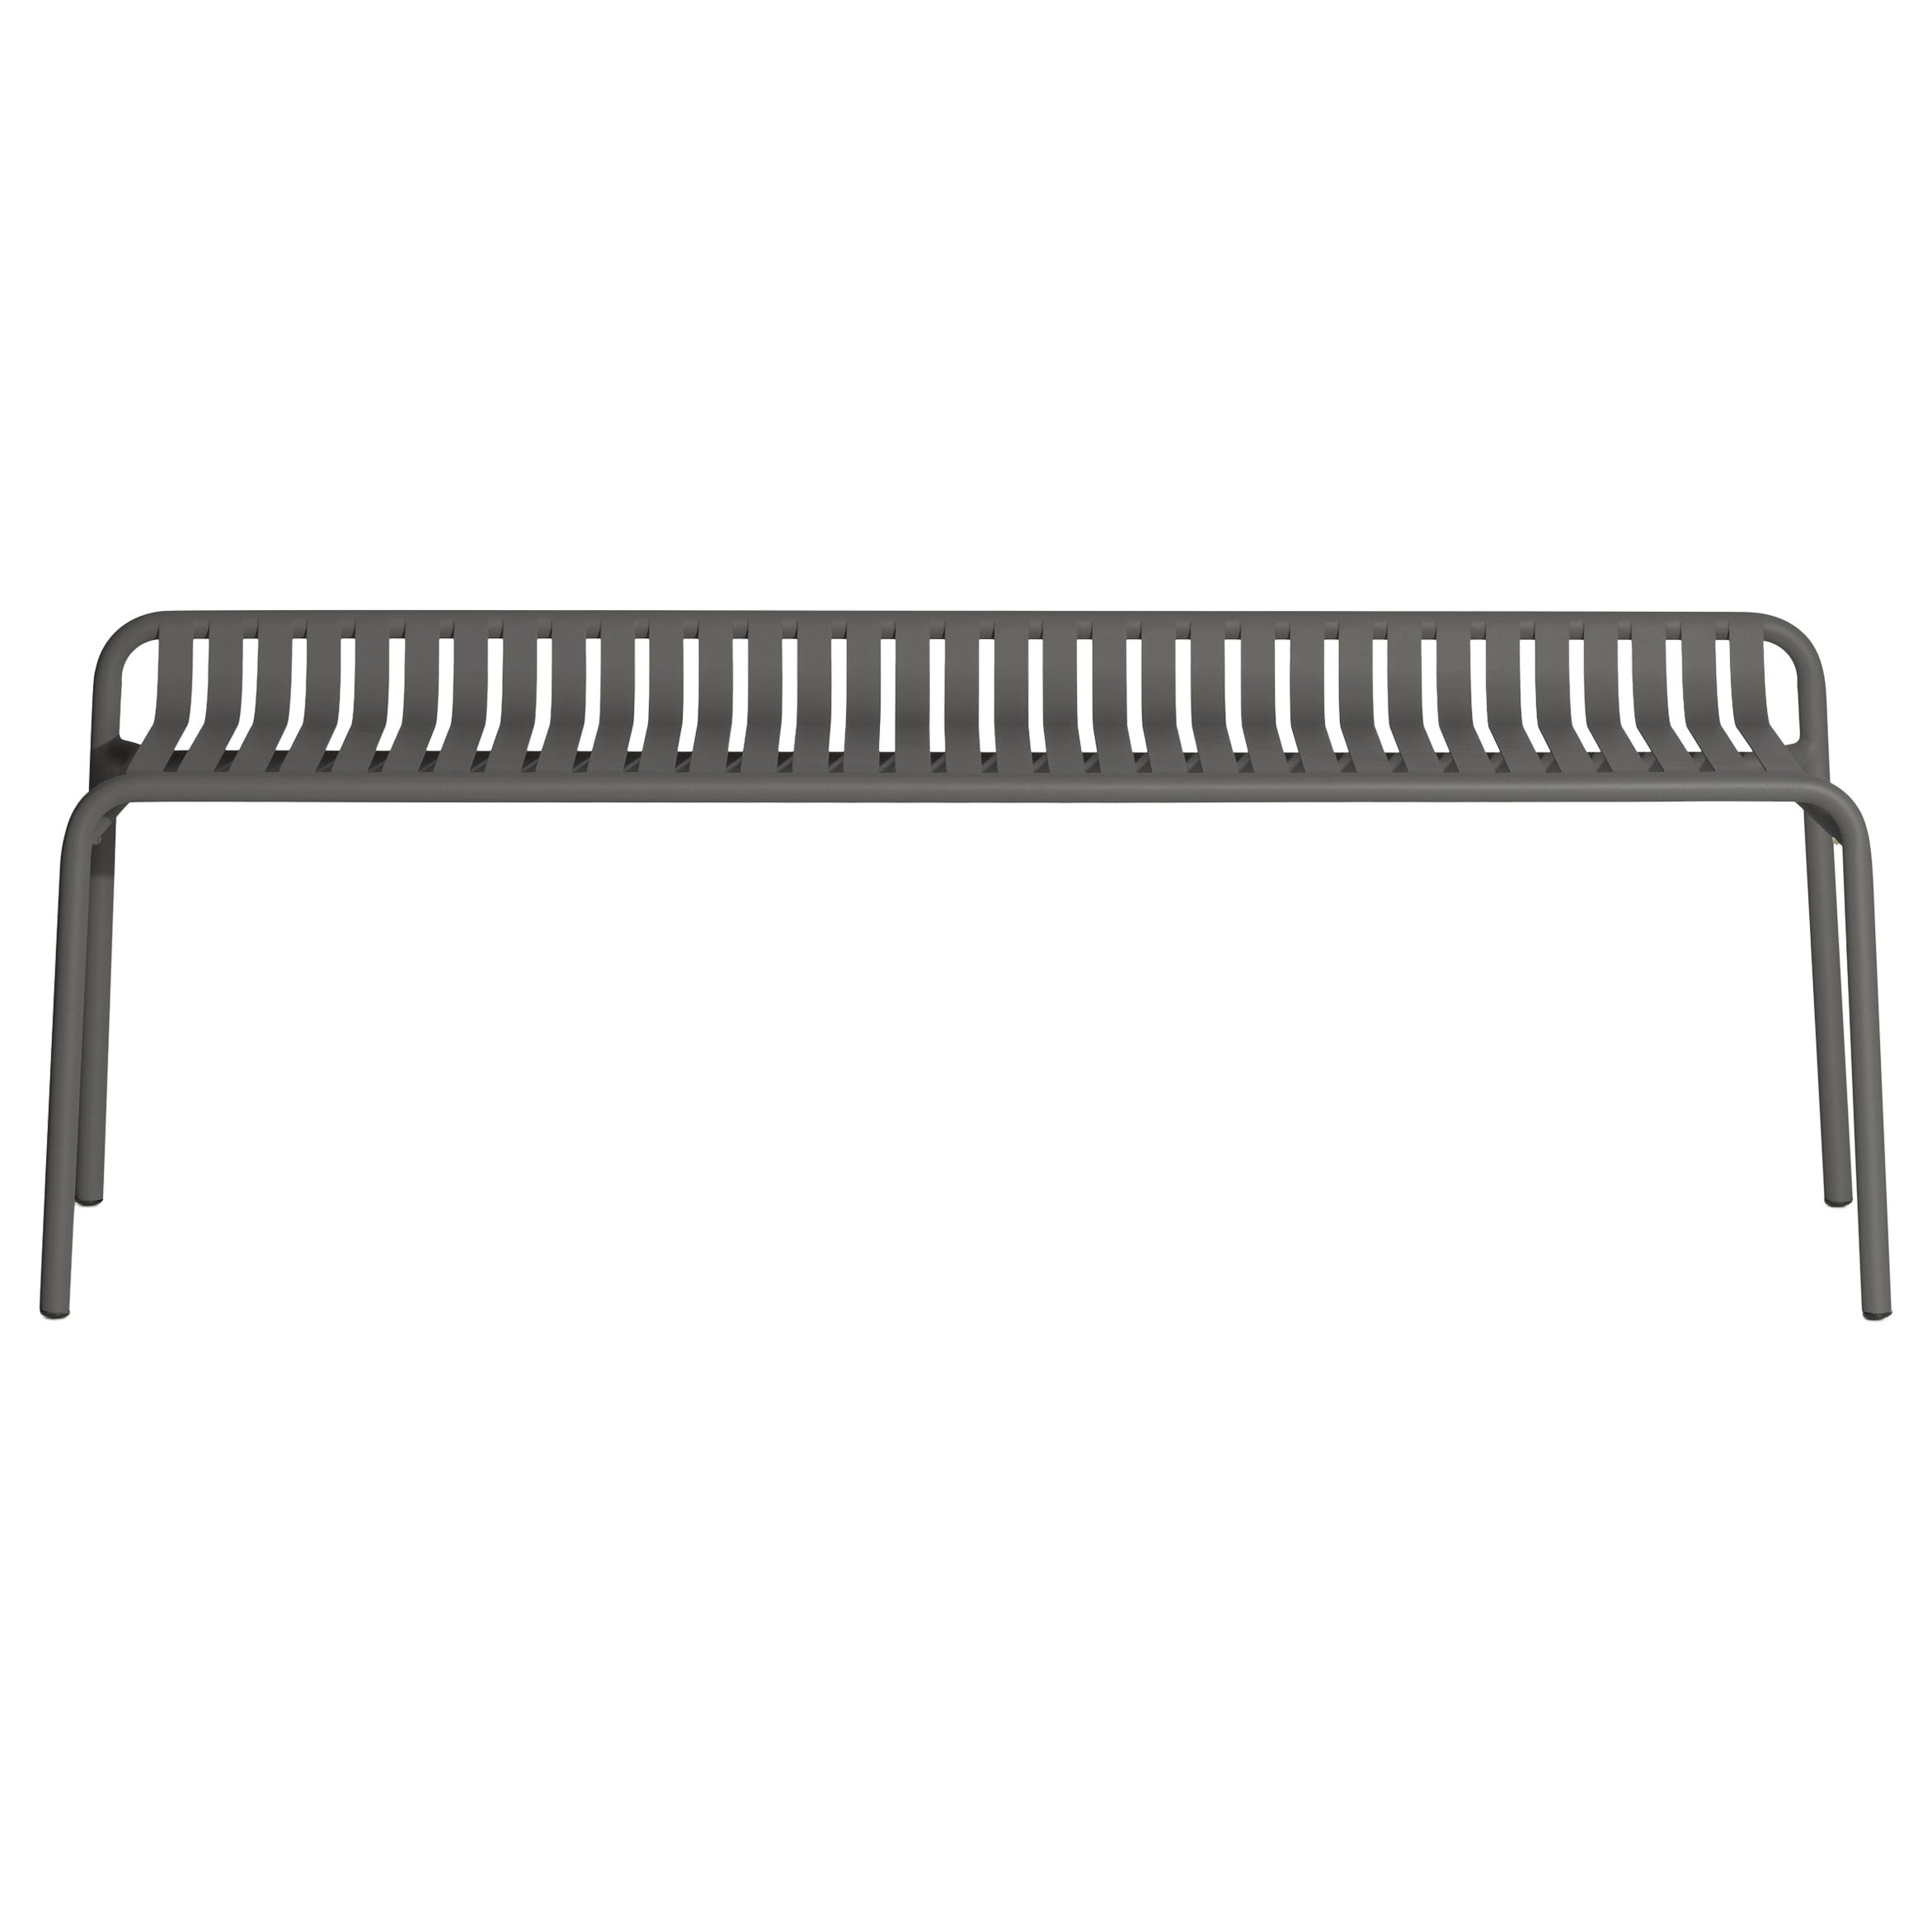 Petite Friture Week-End Bench without Back in Anthracite Aluminium, 2017  For Sale